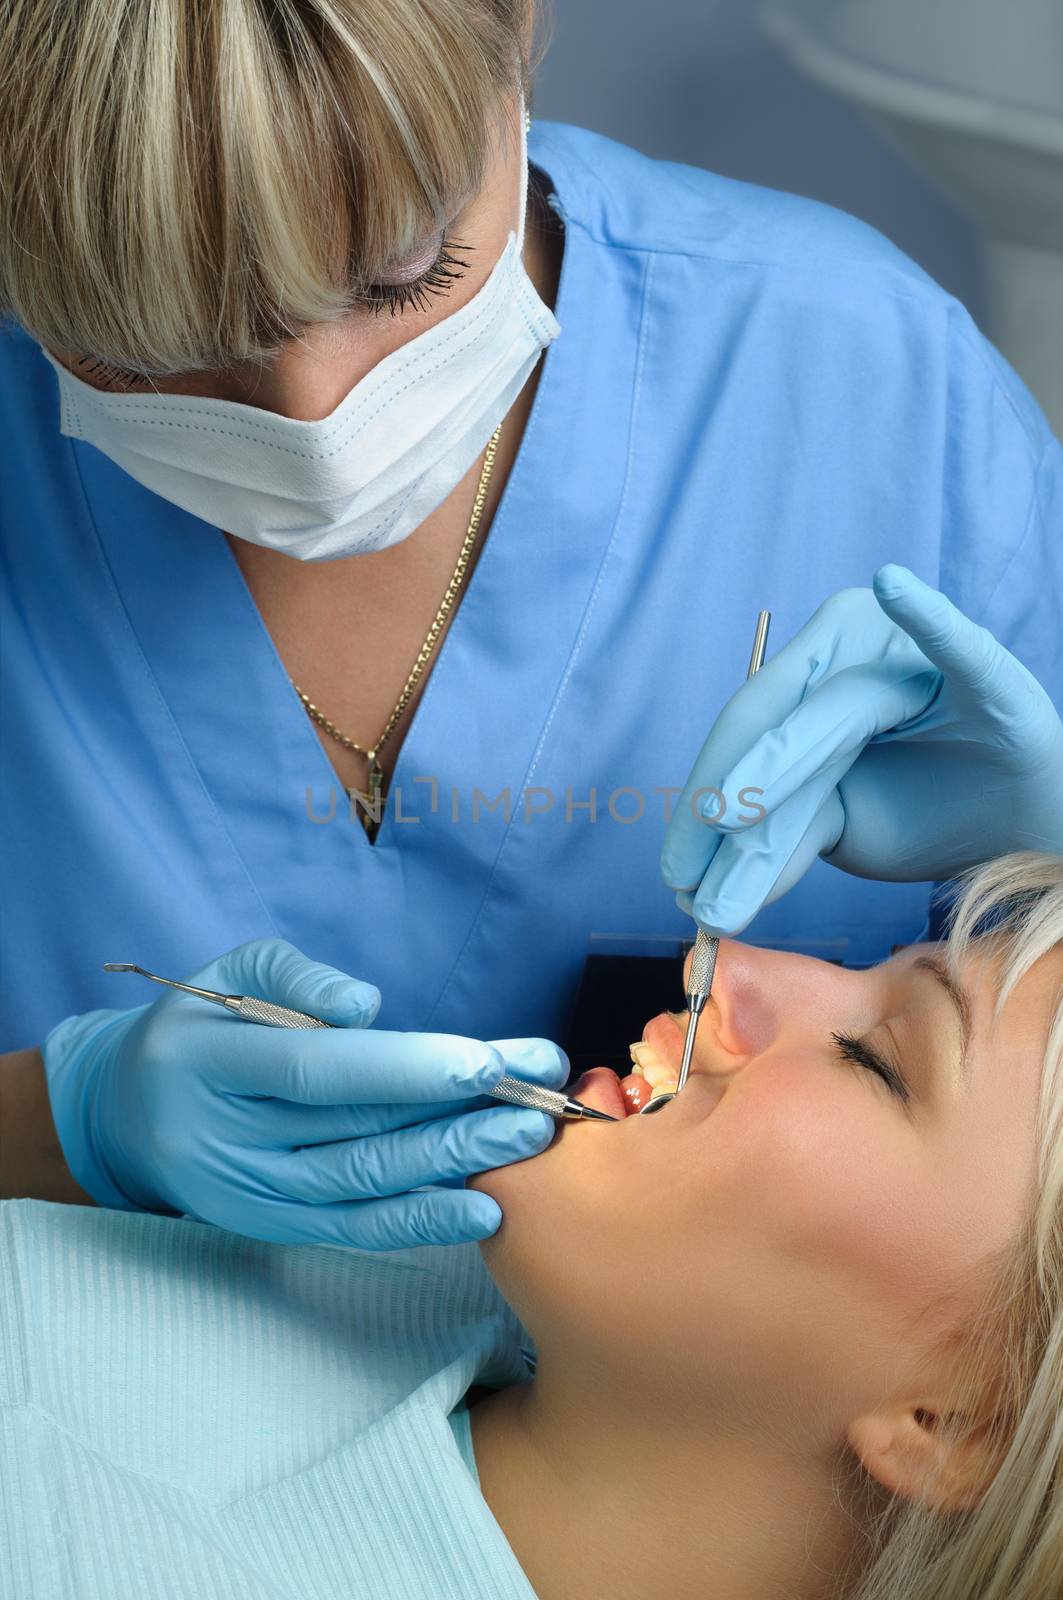 dentist at work with patient, dental exam and calcucus removal